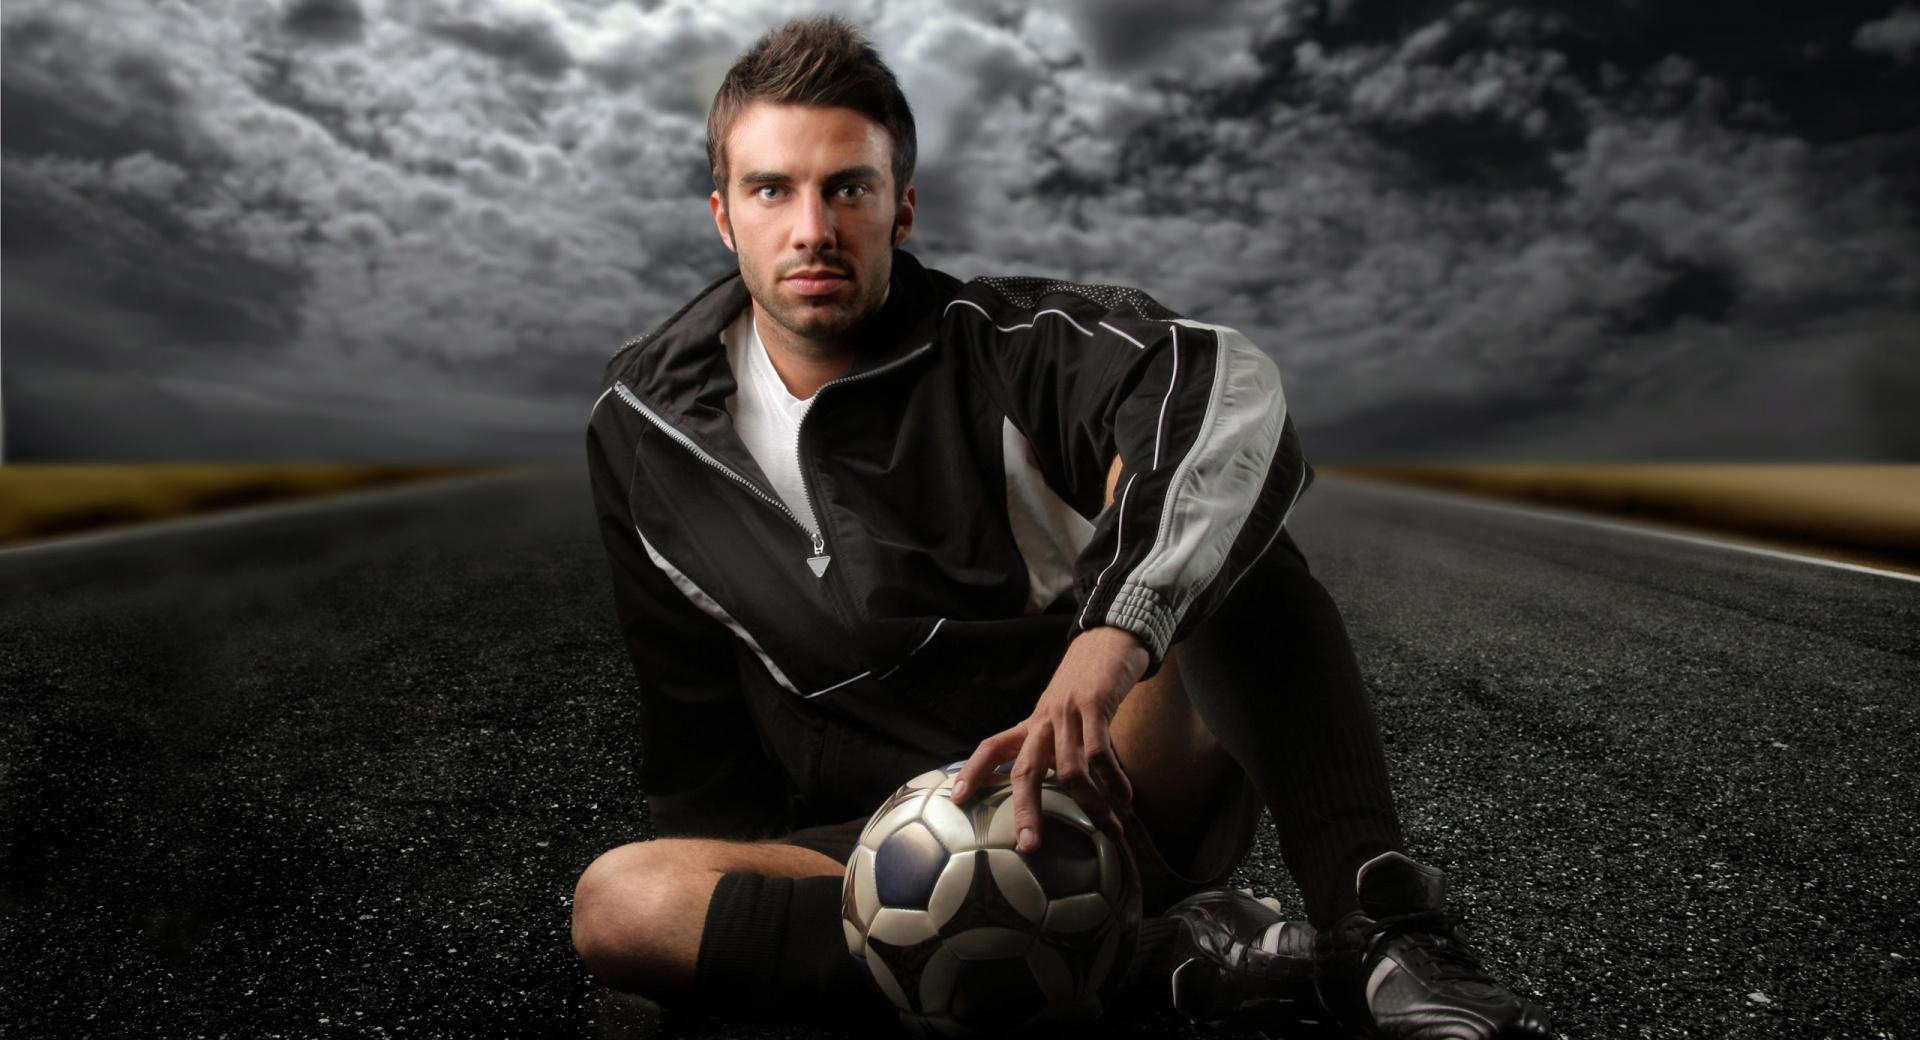 Soccer Goalie, South Africa 2010 wallpapers HD quality